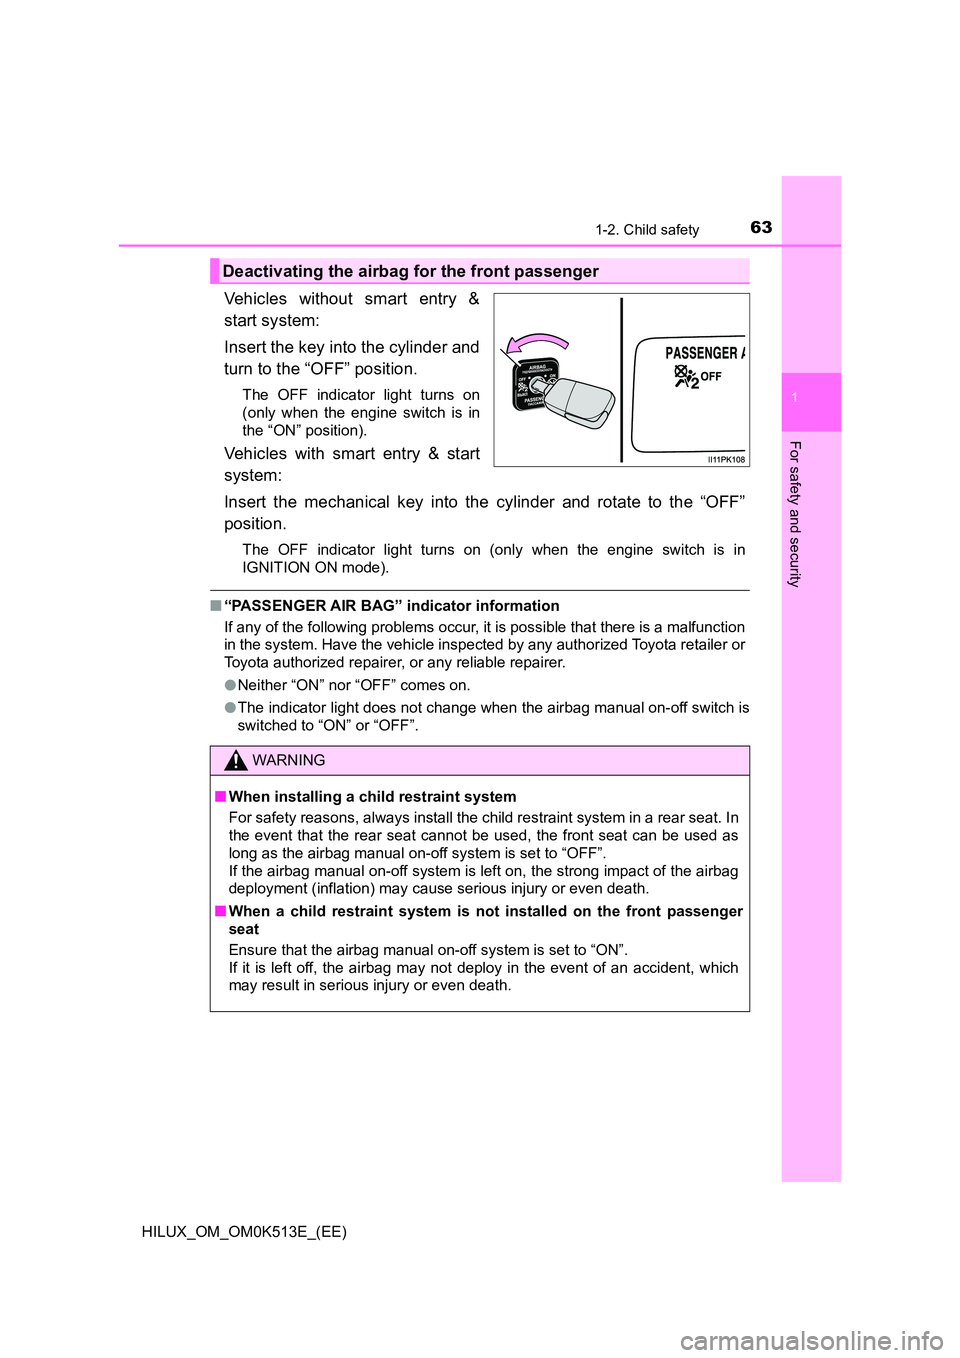 TOYOTA HILUX 2022  Owners Manual 631-2. Child safety
1
HILUX_OM_OM0K513E_(EE)
For safety and security
Vehicles without smart entry & 
start system: 
Insert the key into the cylinder and 
turn to the “OFF” position.
The OFF indica